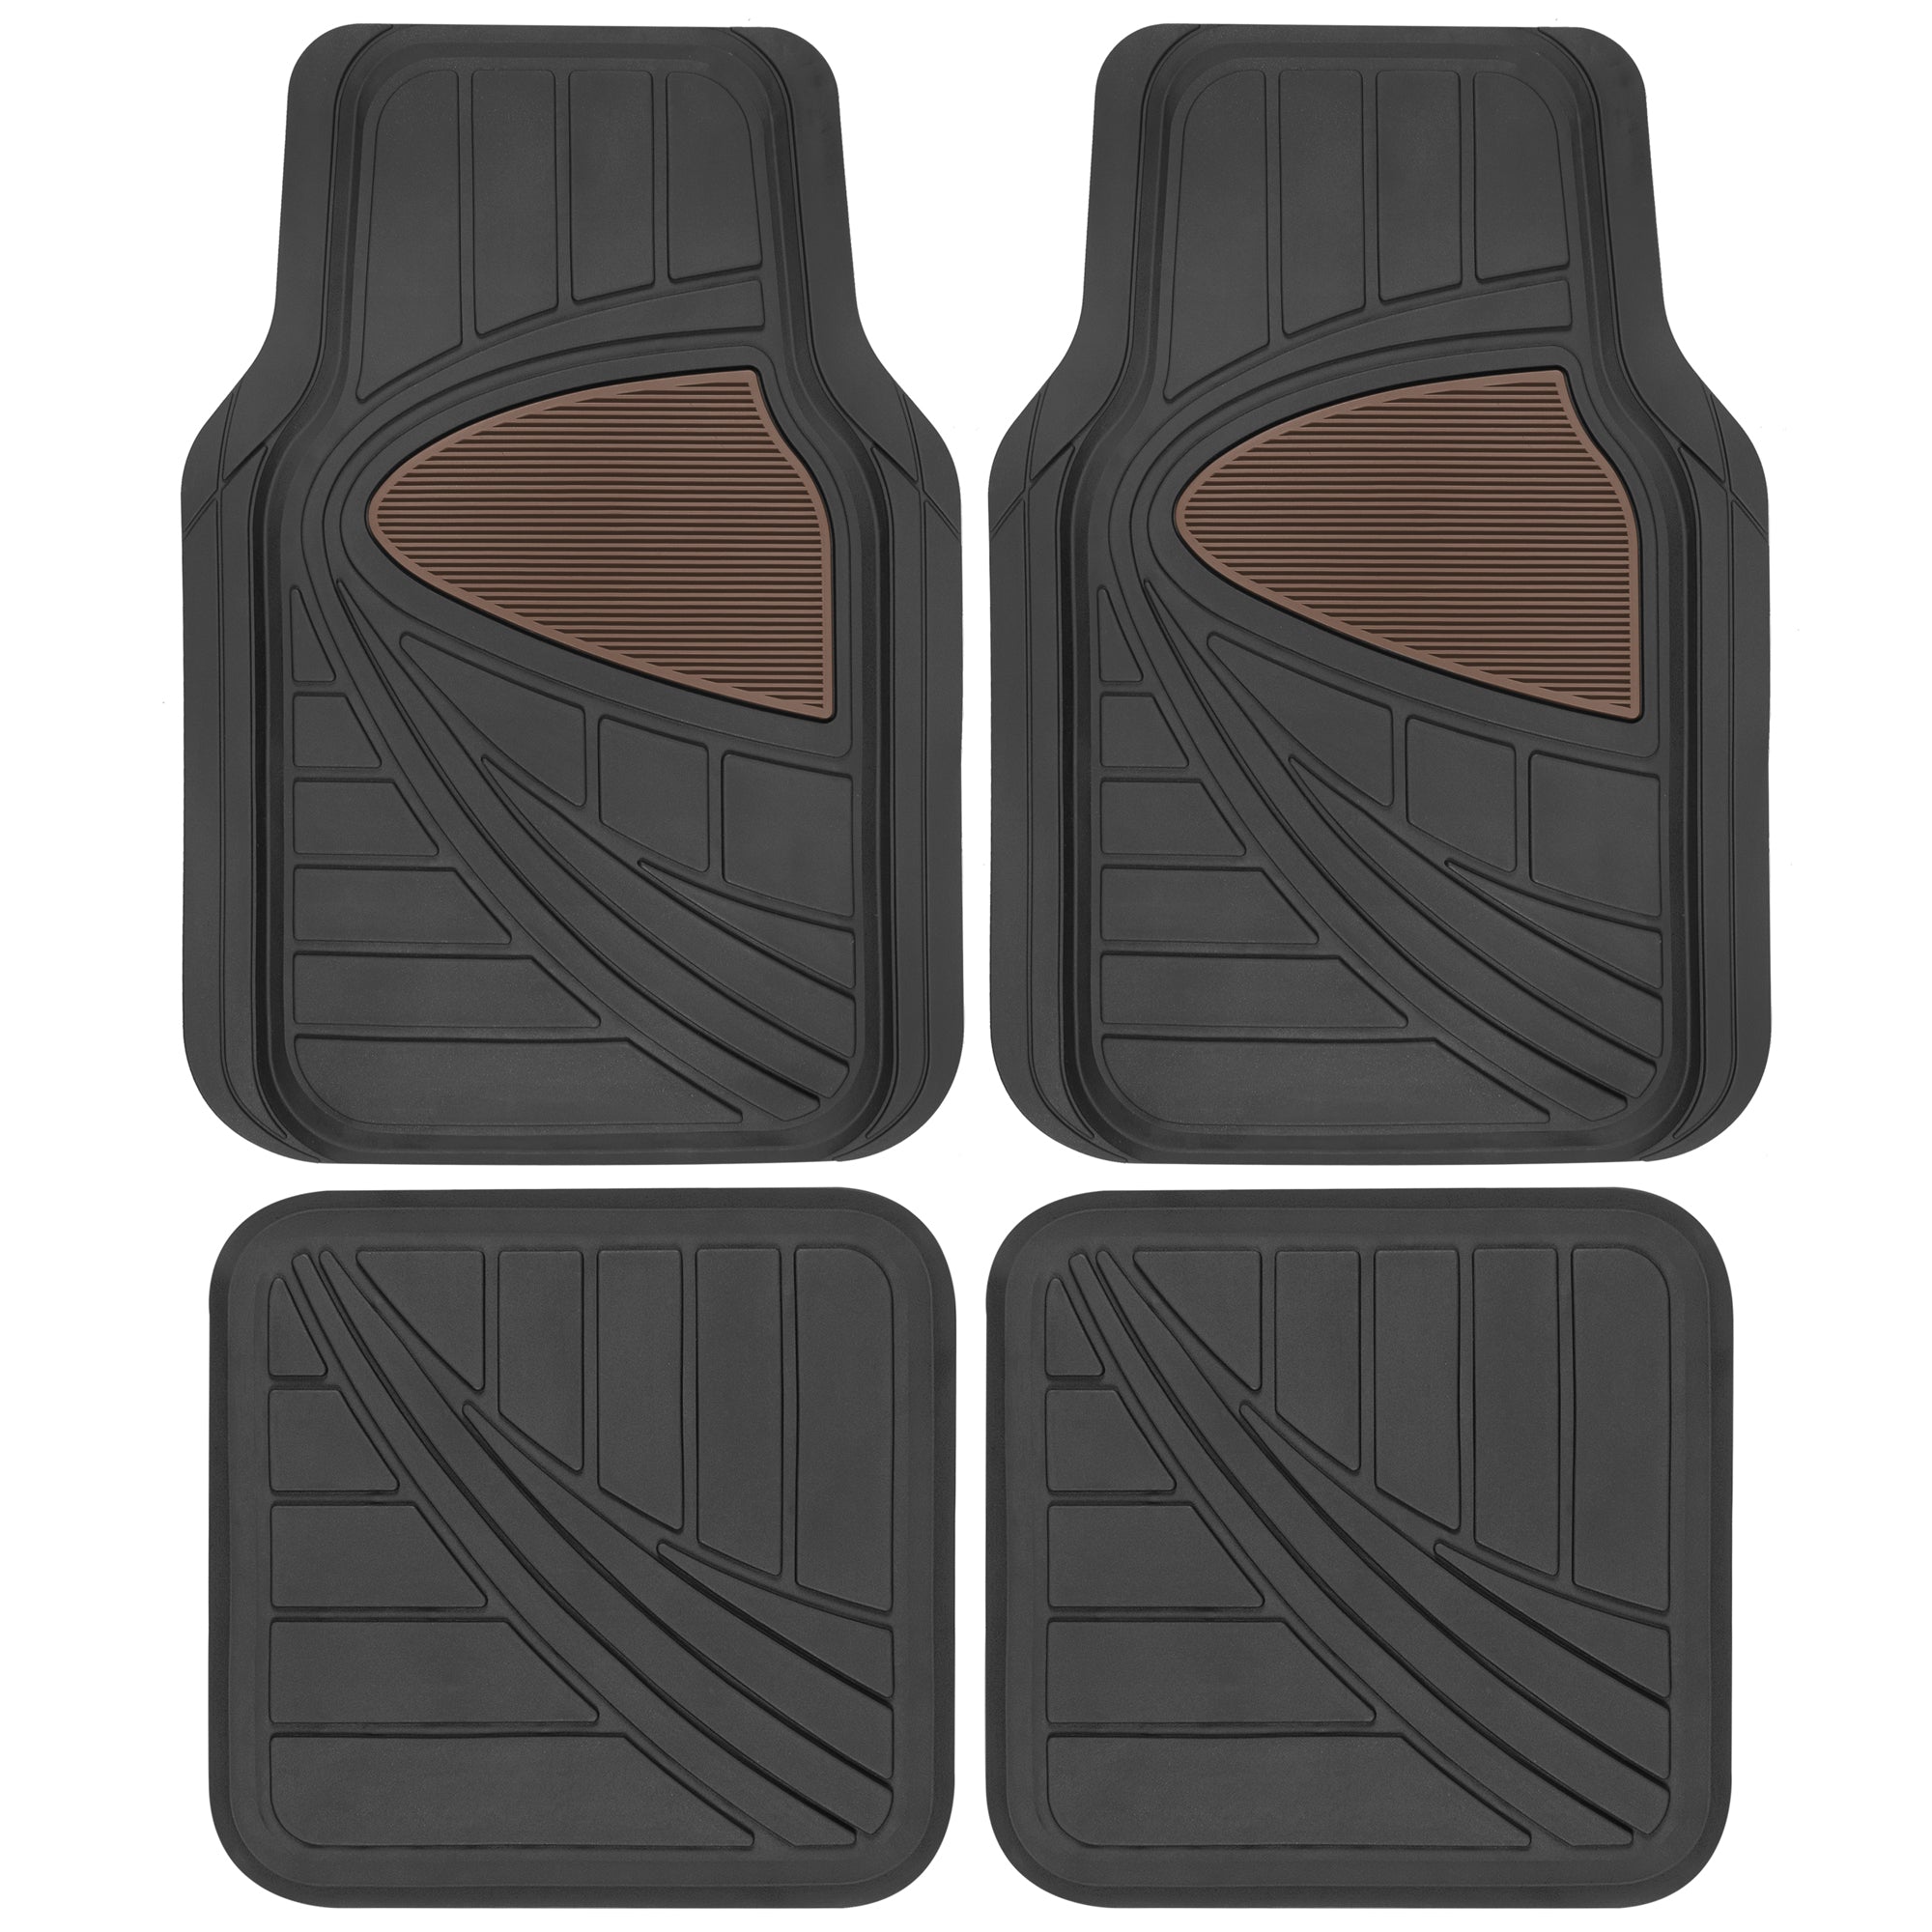 Motor Trend Two-Tone Black/Beige Focus Rubber Car Floor Mats for Autos SUV Truck & Van - All-Weather Waterproof Protection Front & Rear Liners, Trim To Fit Most Vehicles